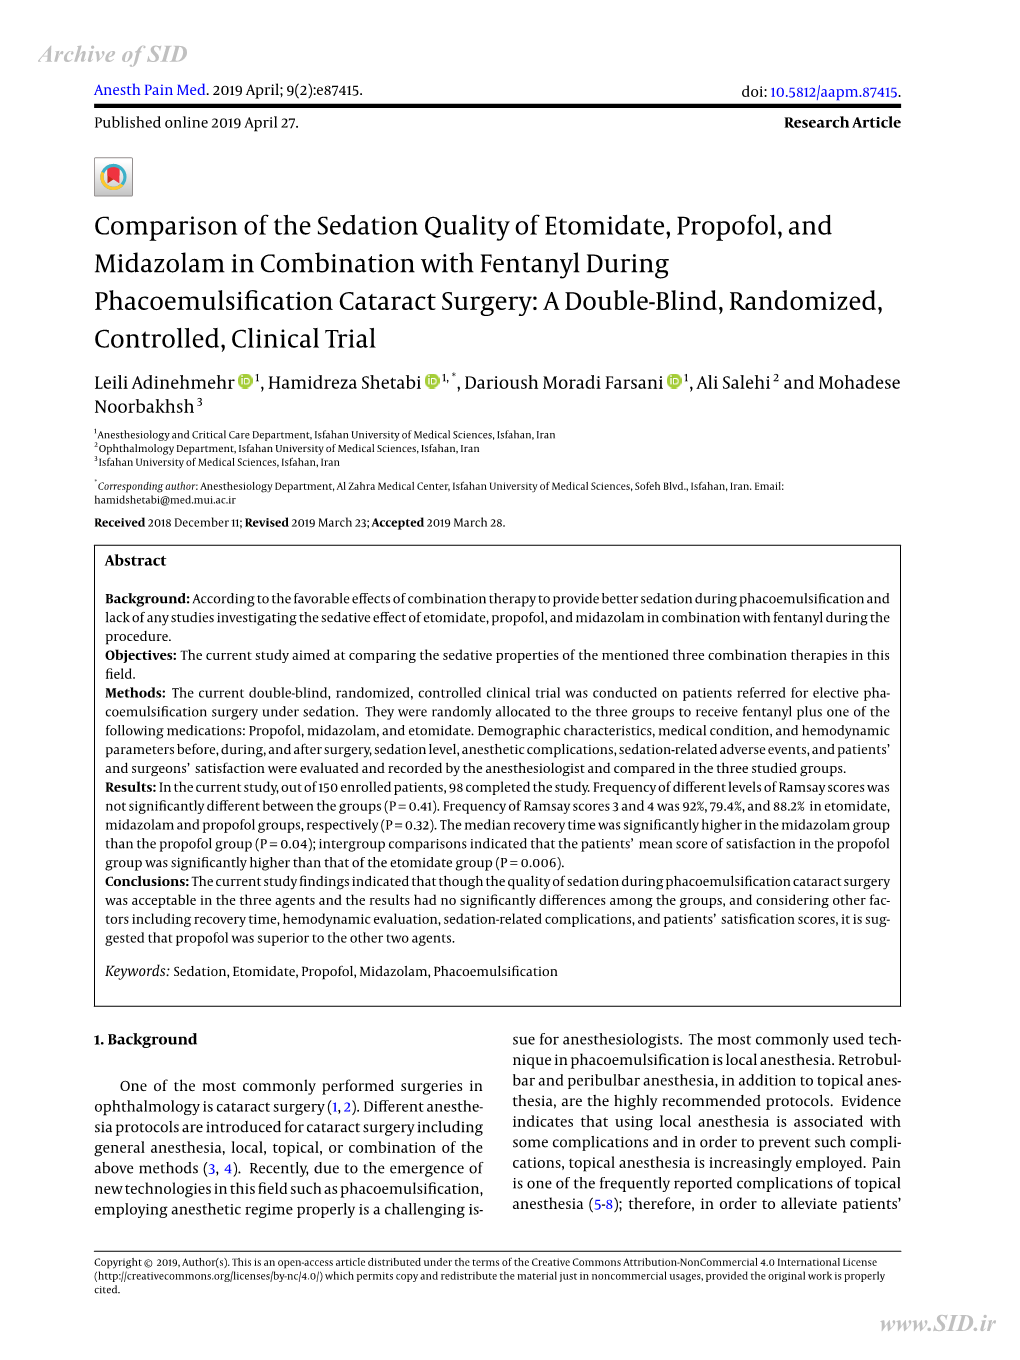 Comparison of the Sedation Quality of Etomidate, Propofol, And